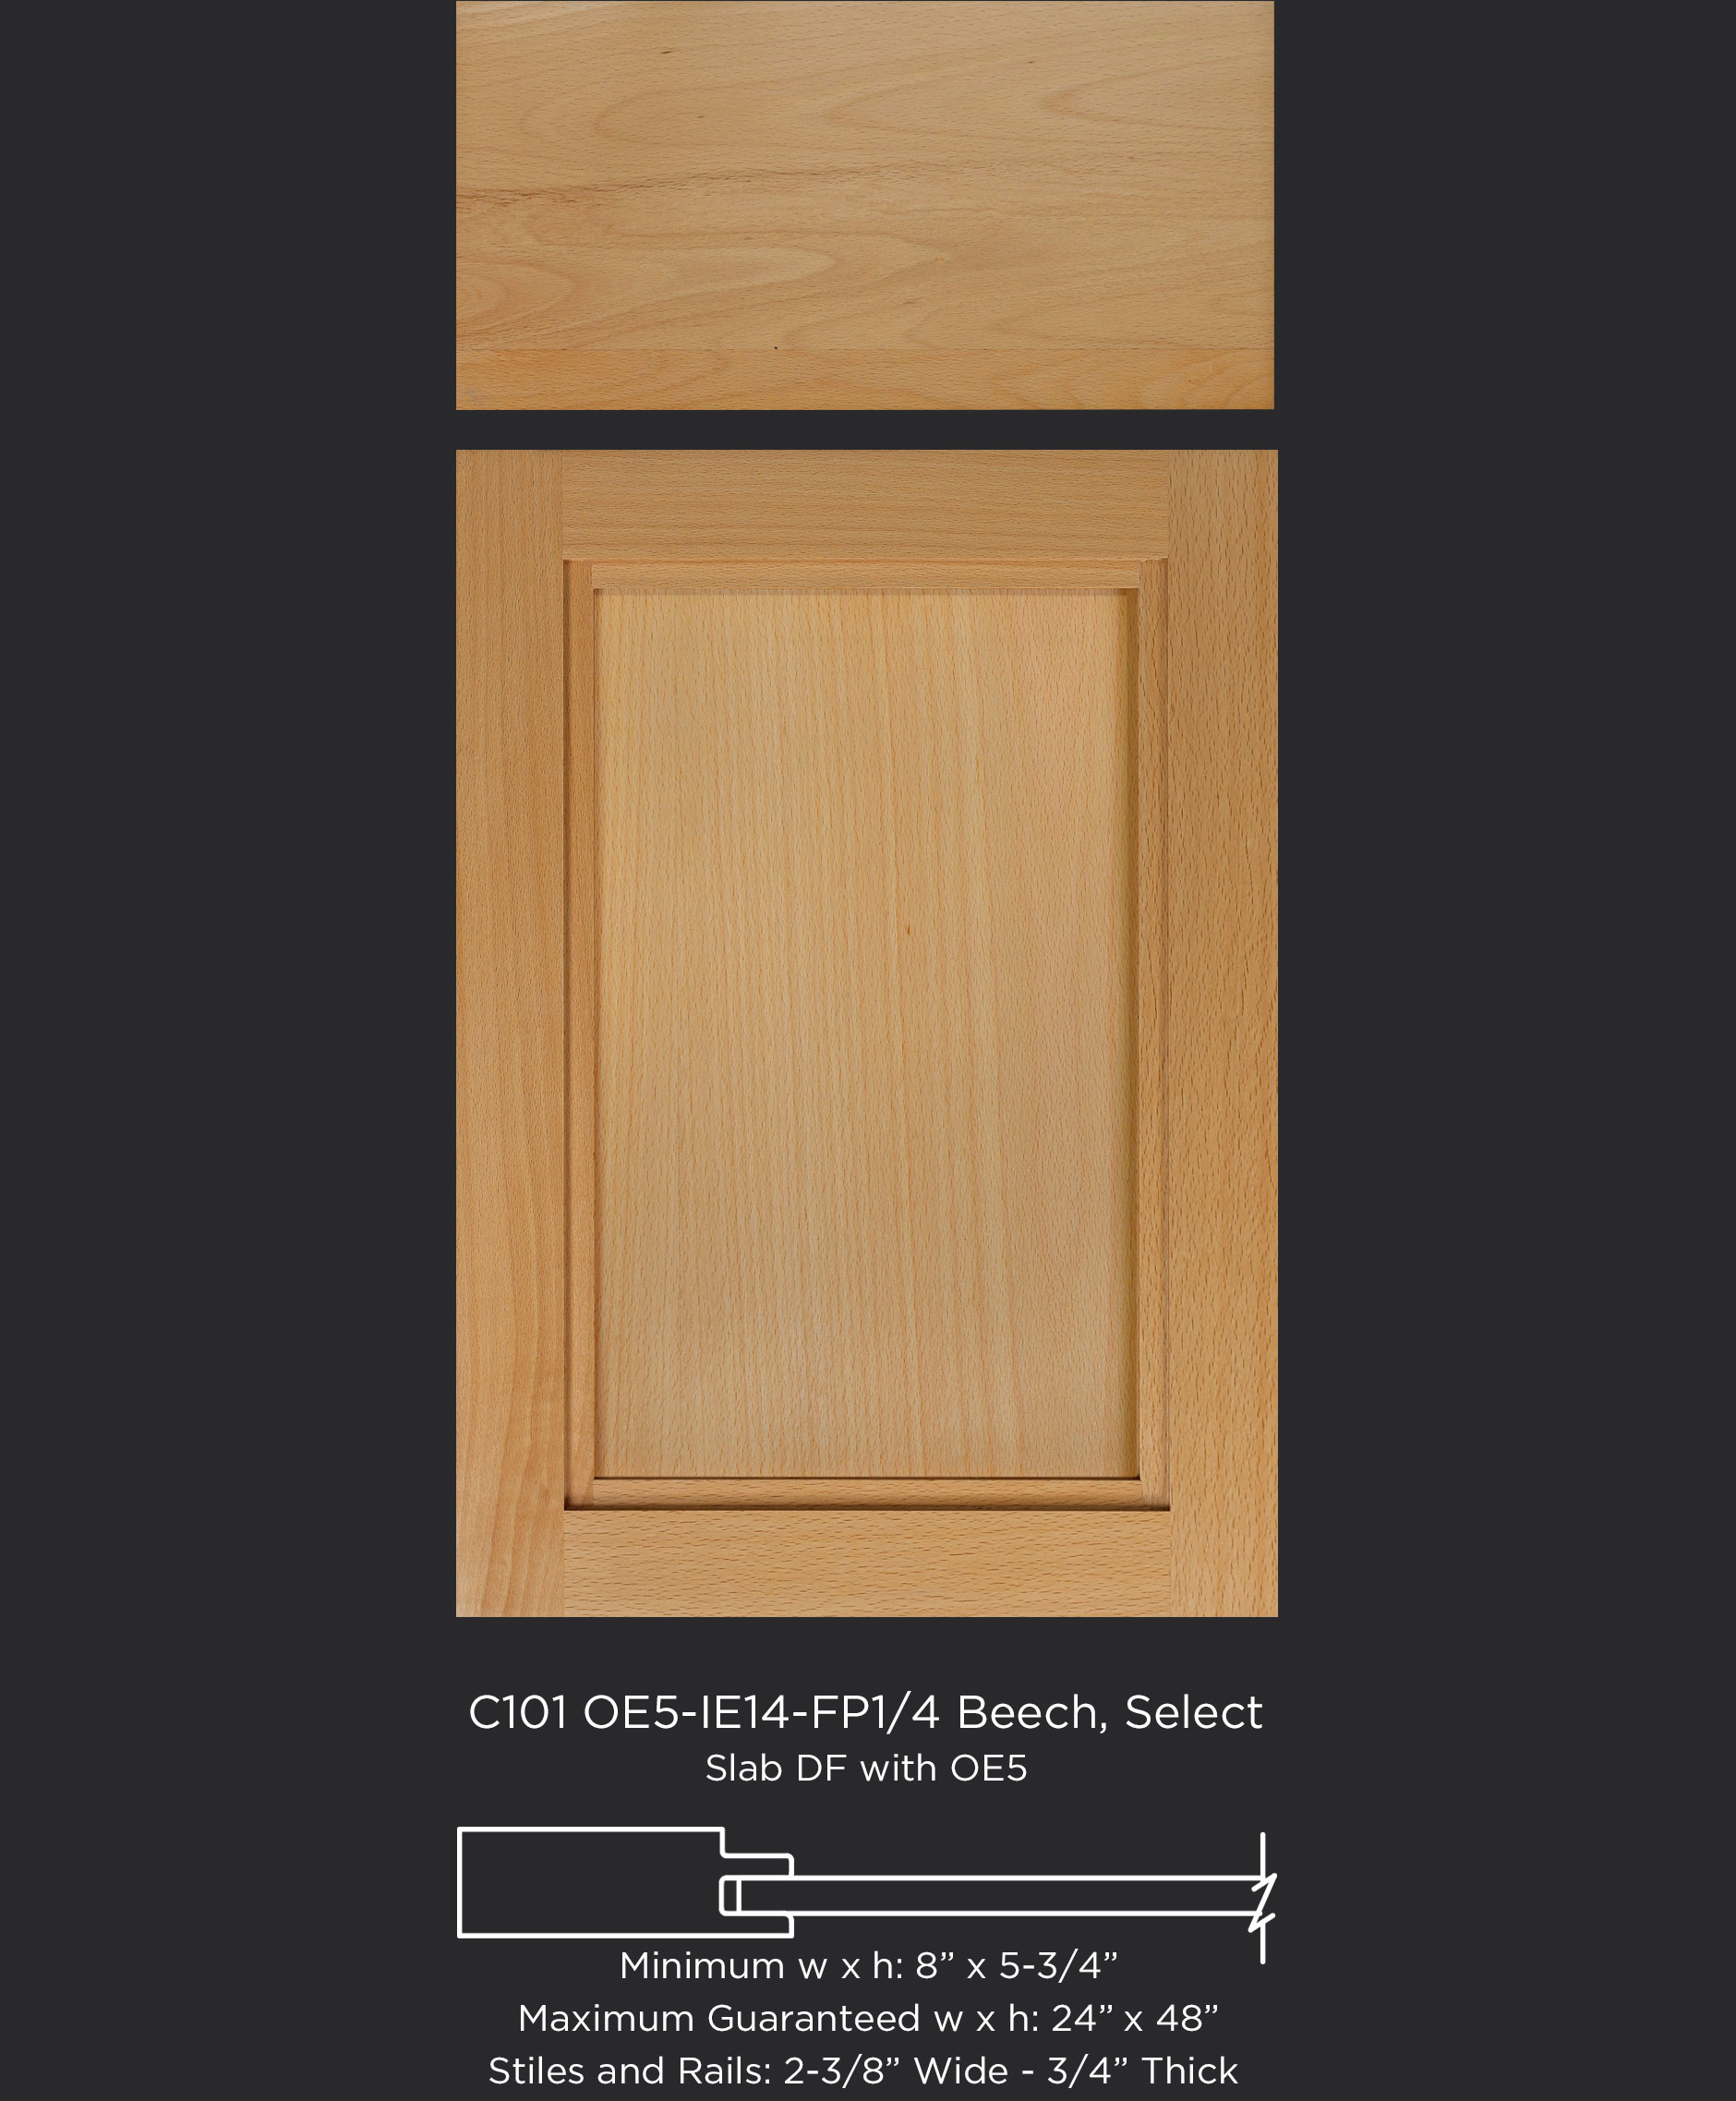 Transitional Select Beech cabinet door with OE5, IE14, FP1/4